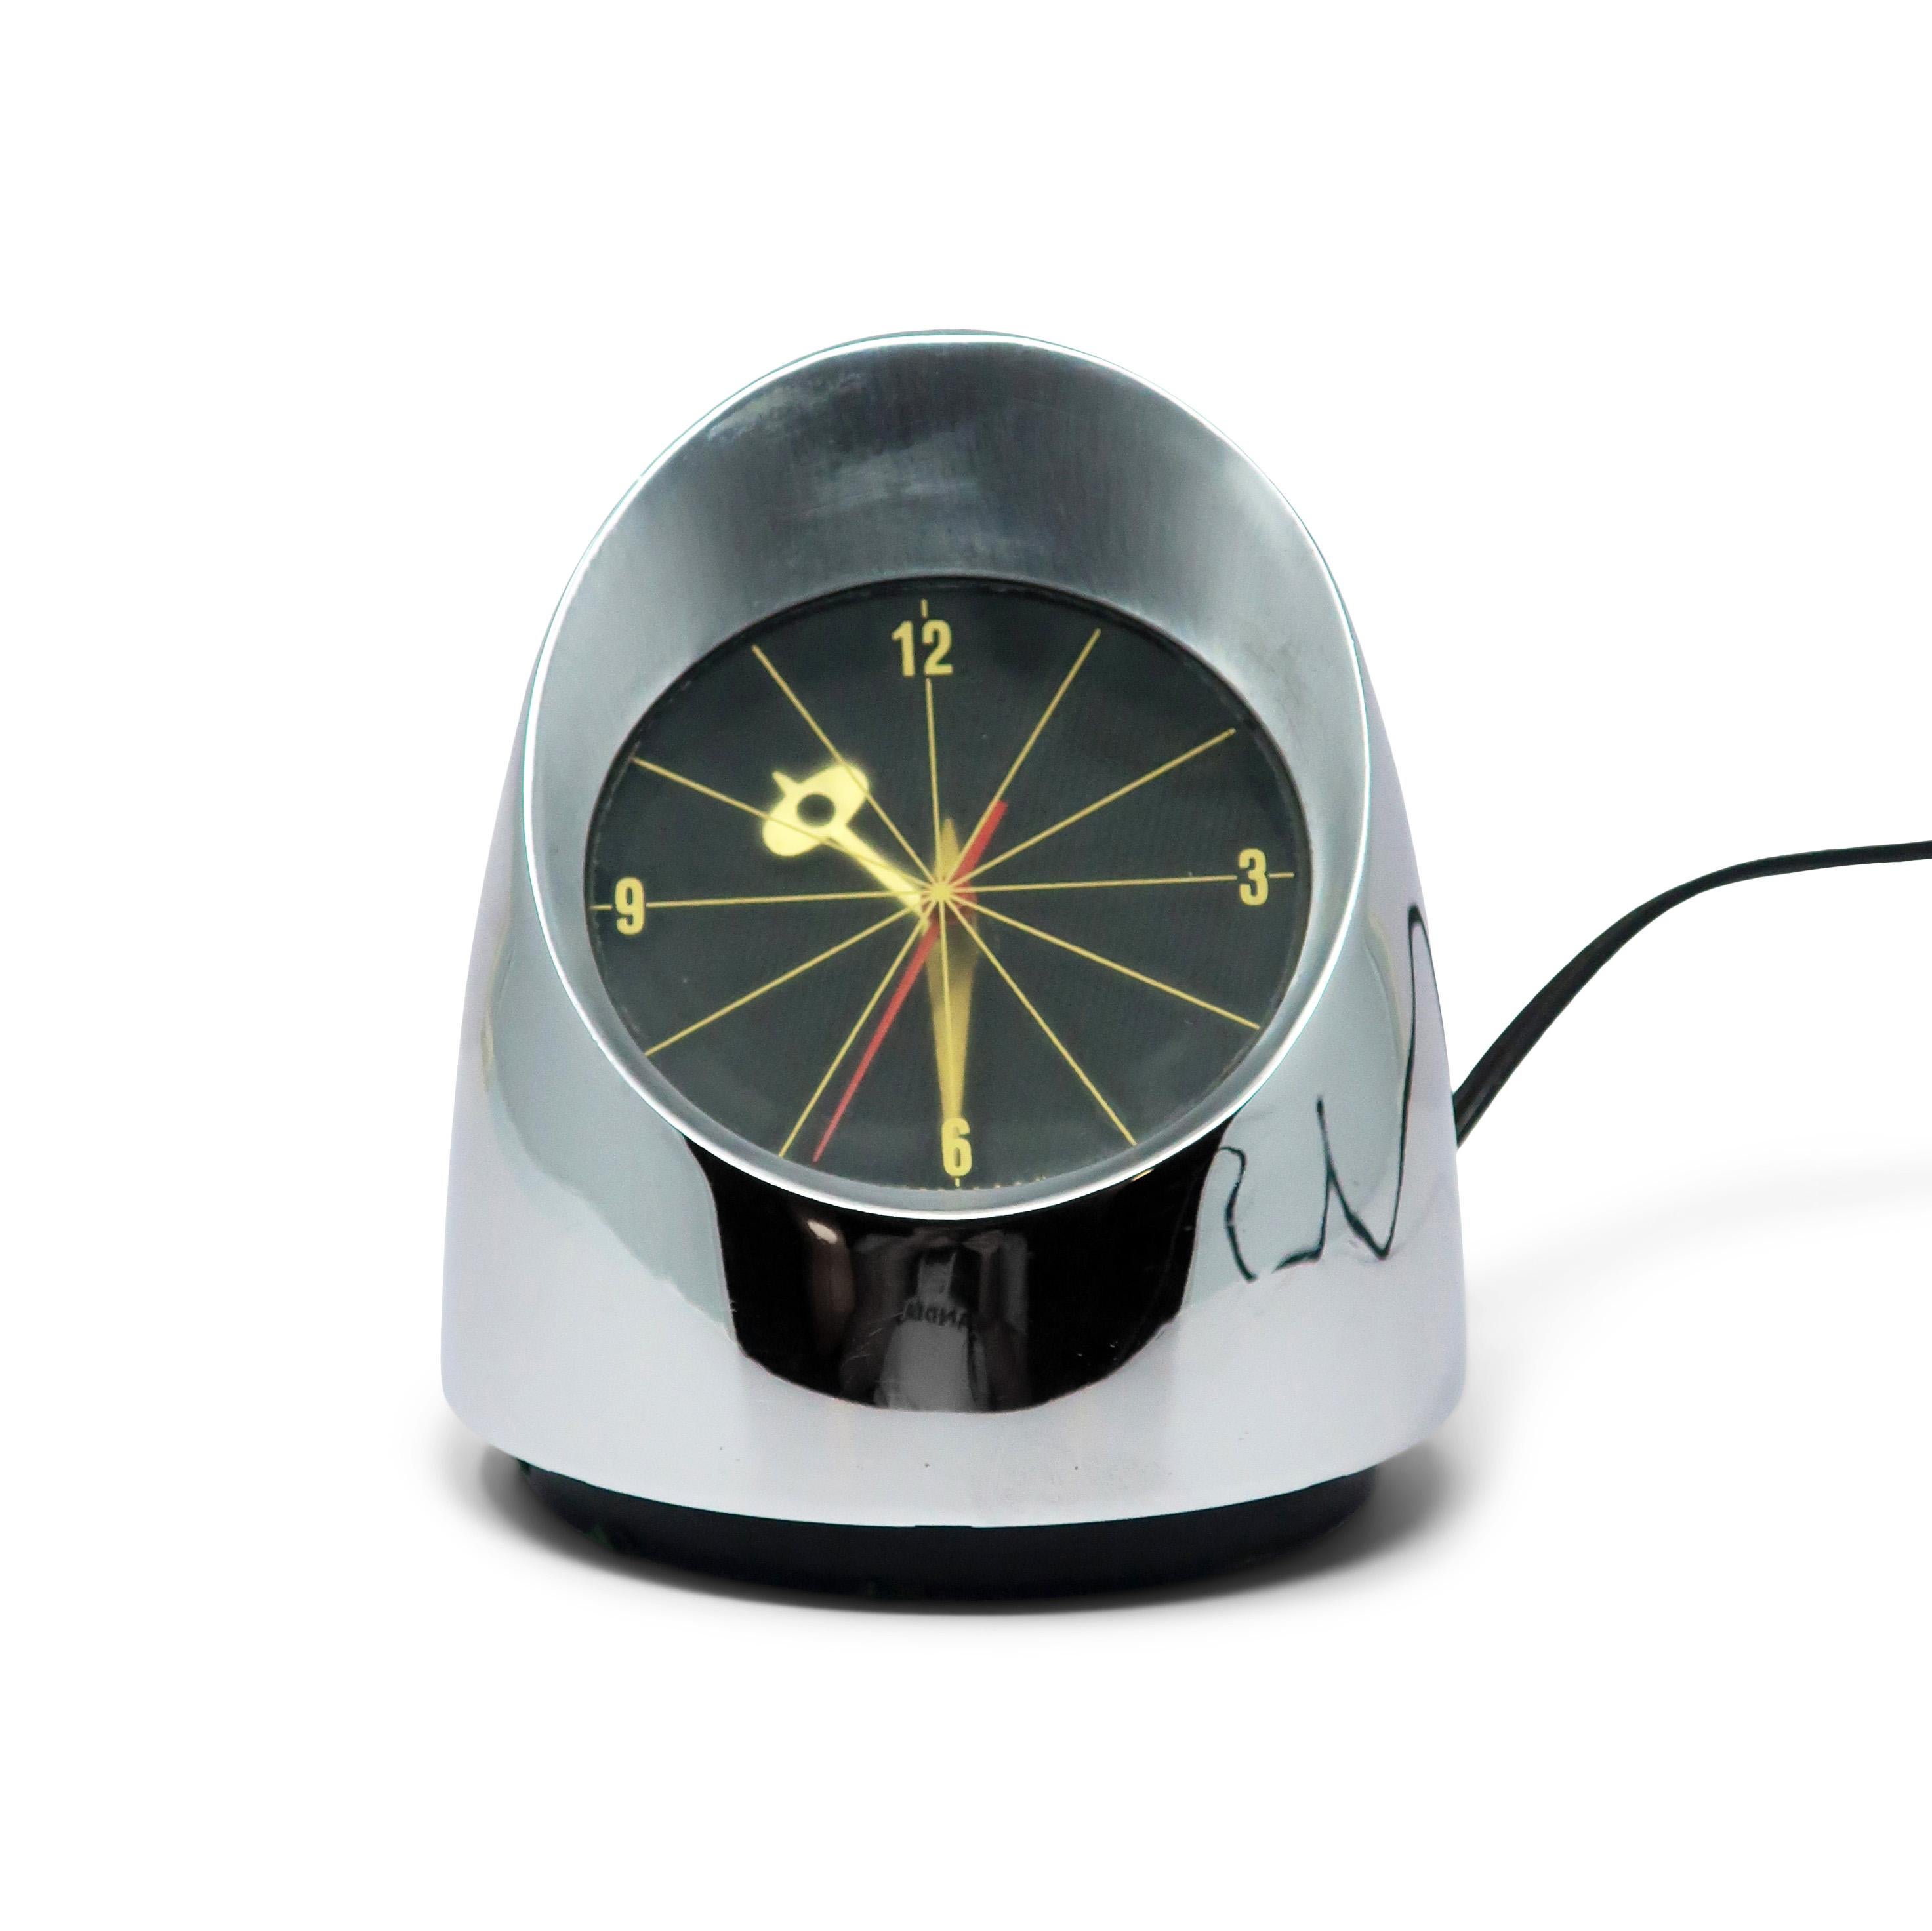 Inspired by a ship's compass, the Jefferson 500 is a perfect Space Age desk clock design with a polished chrome case, satin chrome surrounding the dial, and a black plastic base with space to store excess cord. It adds a touch of sophistication and